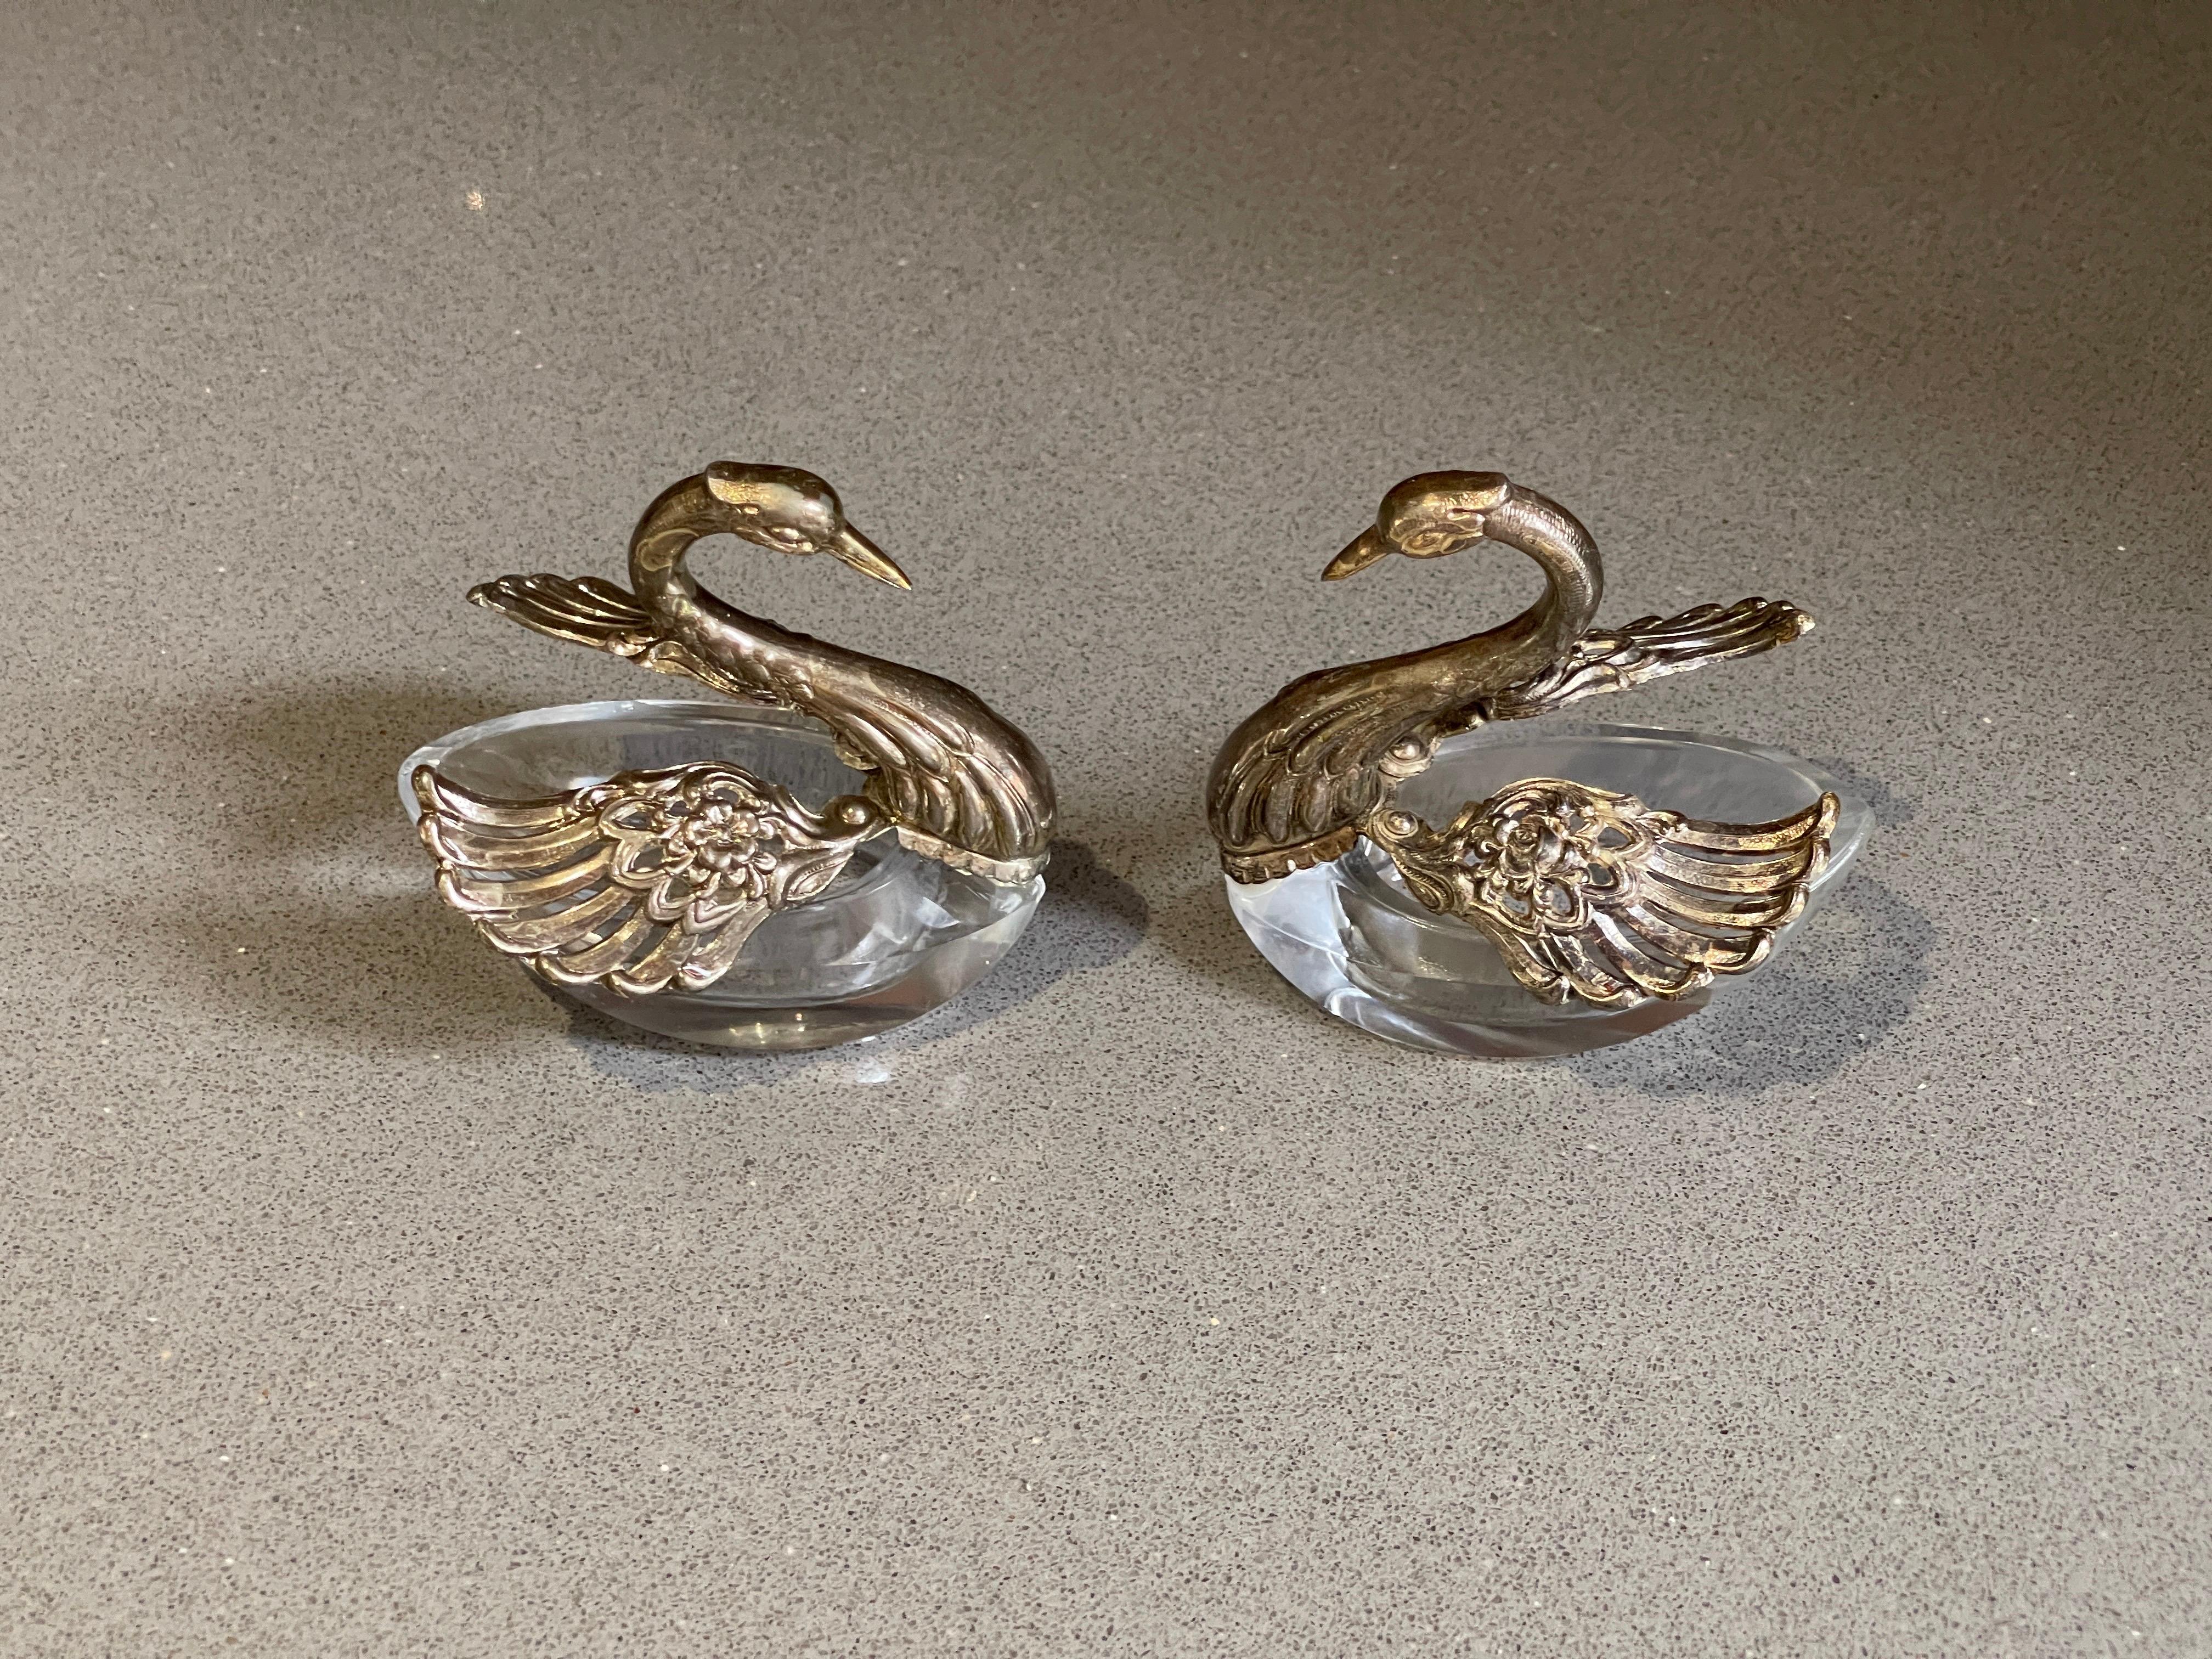 Silver Salt Shaker, A Pair of Antique Salt Shaker Crystal Swann Moving Wings For Sale 2